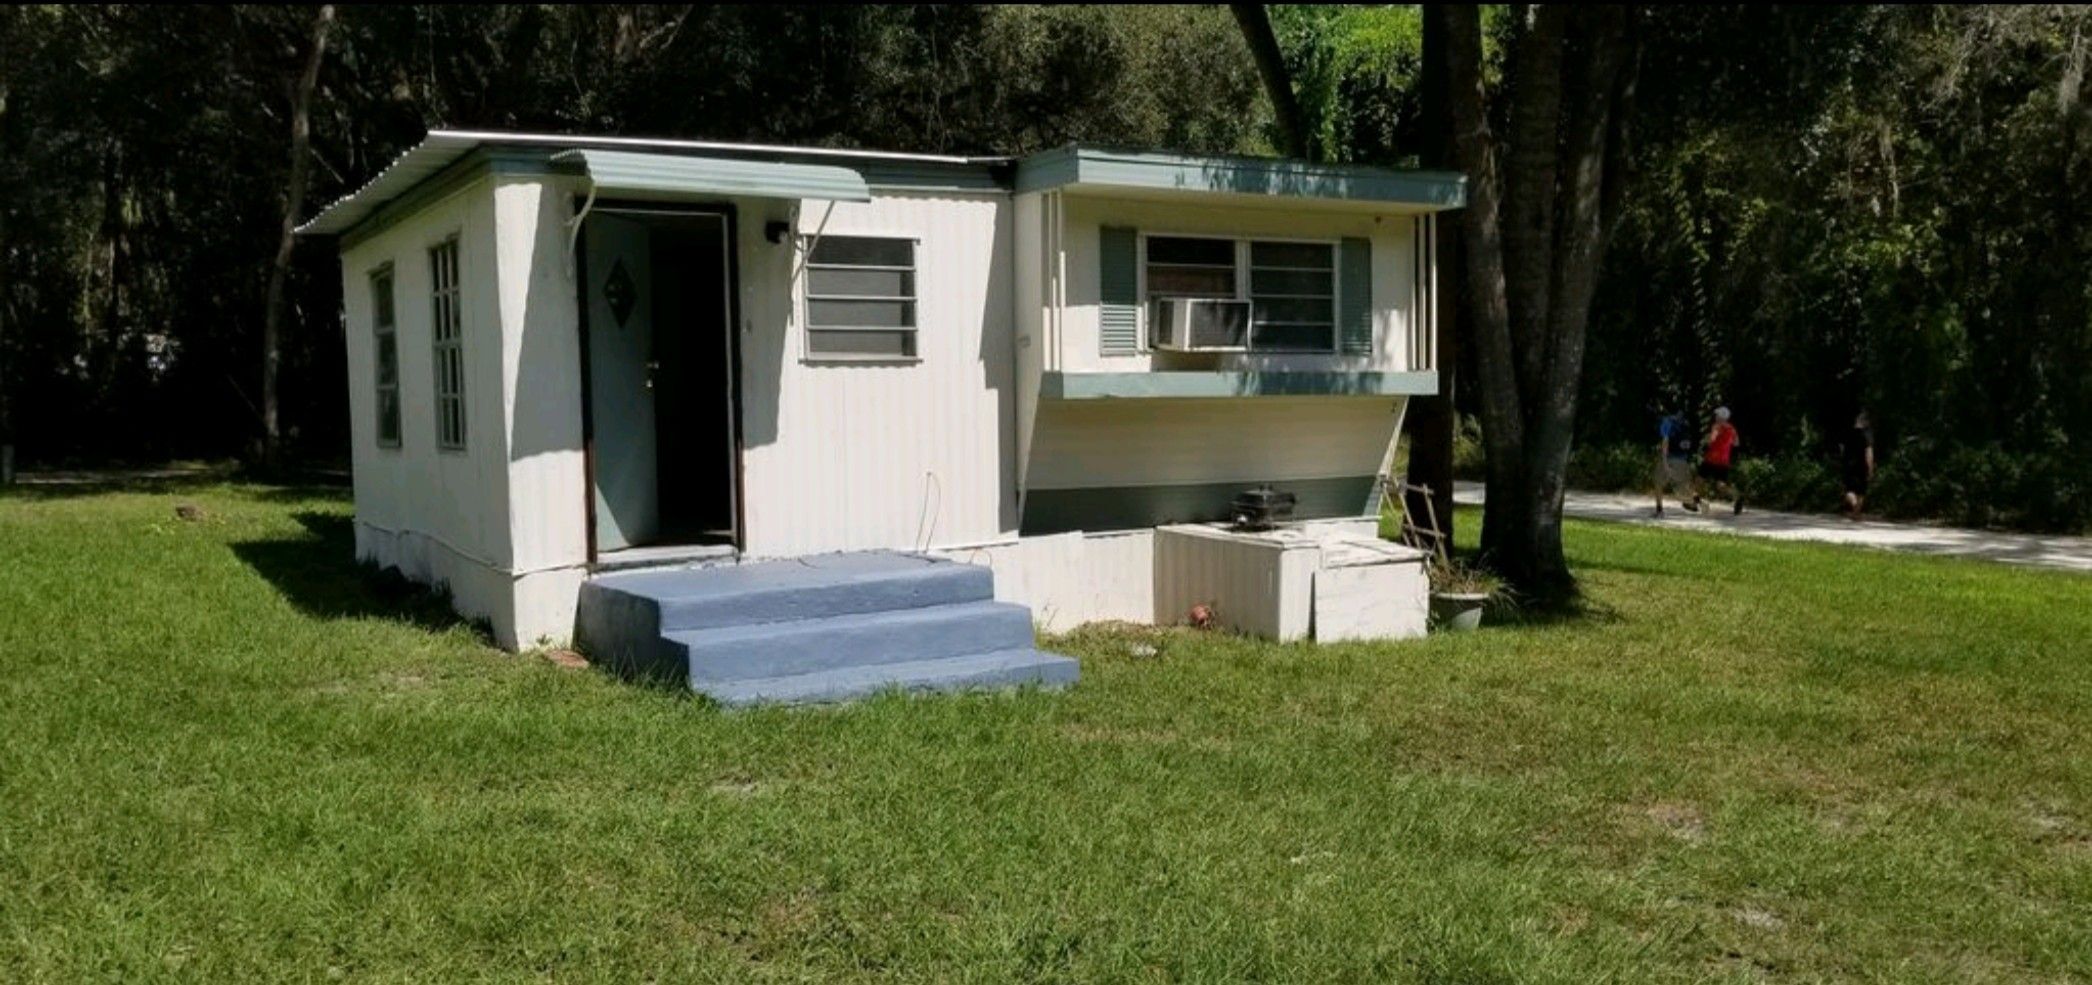 Two mobile homes on .25 acre lot Dunnellon FL